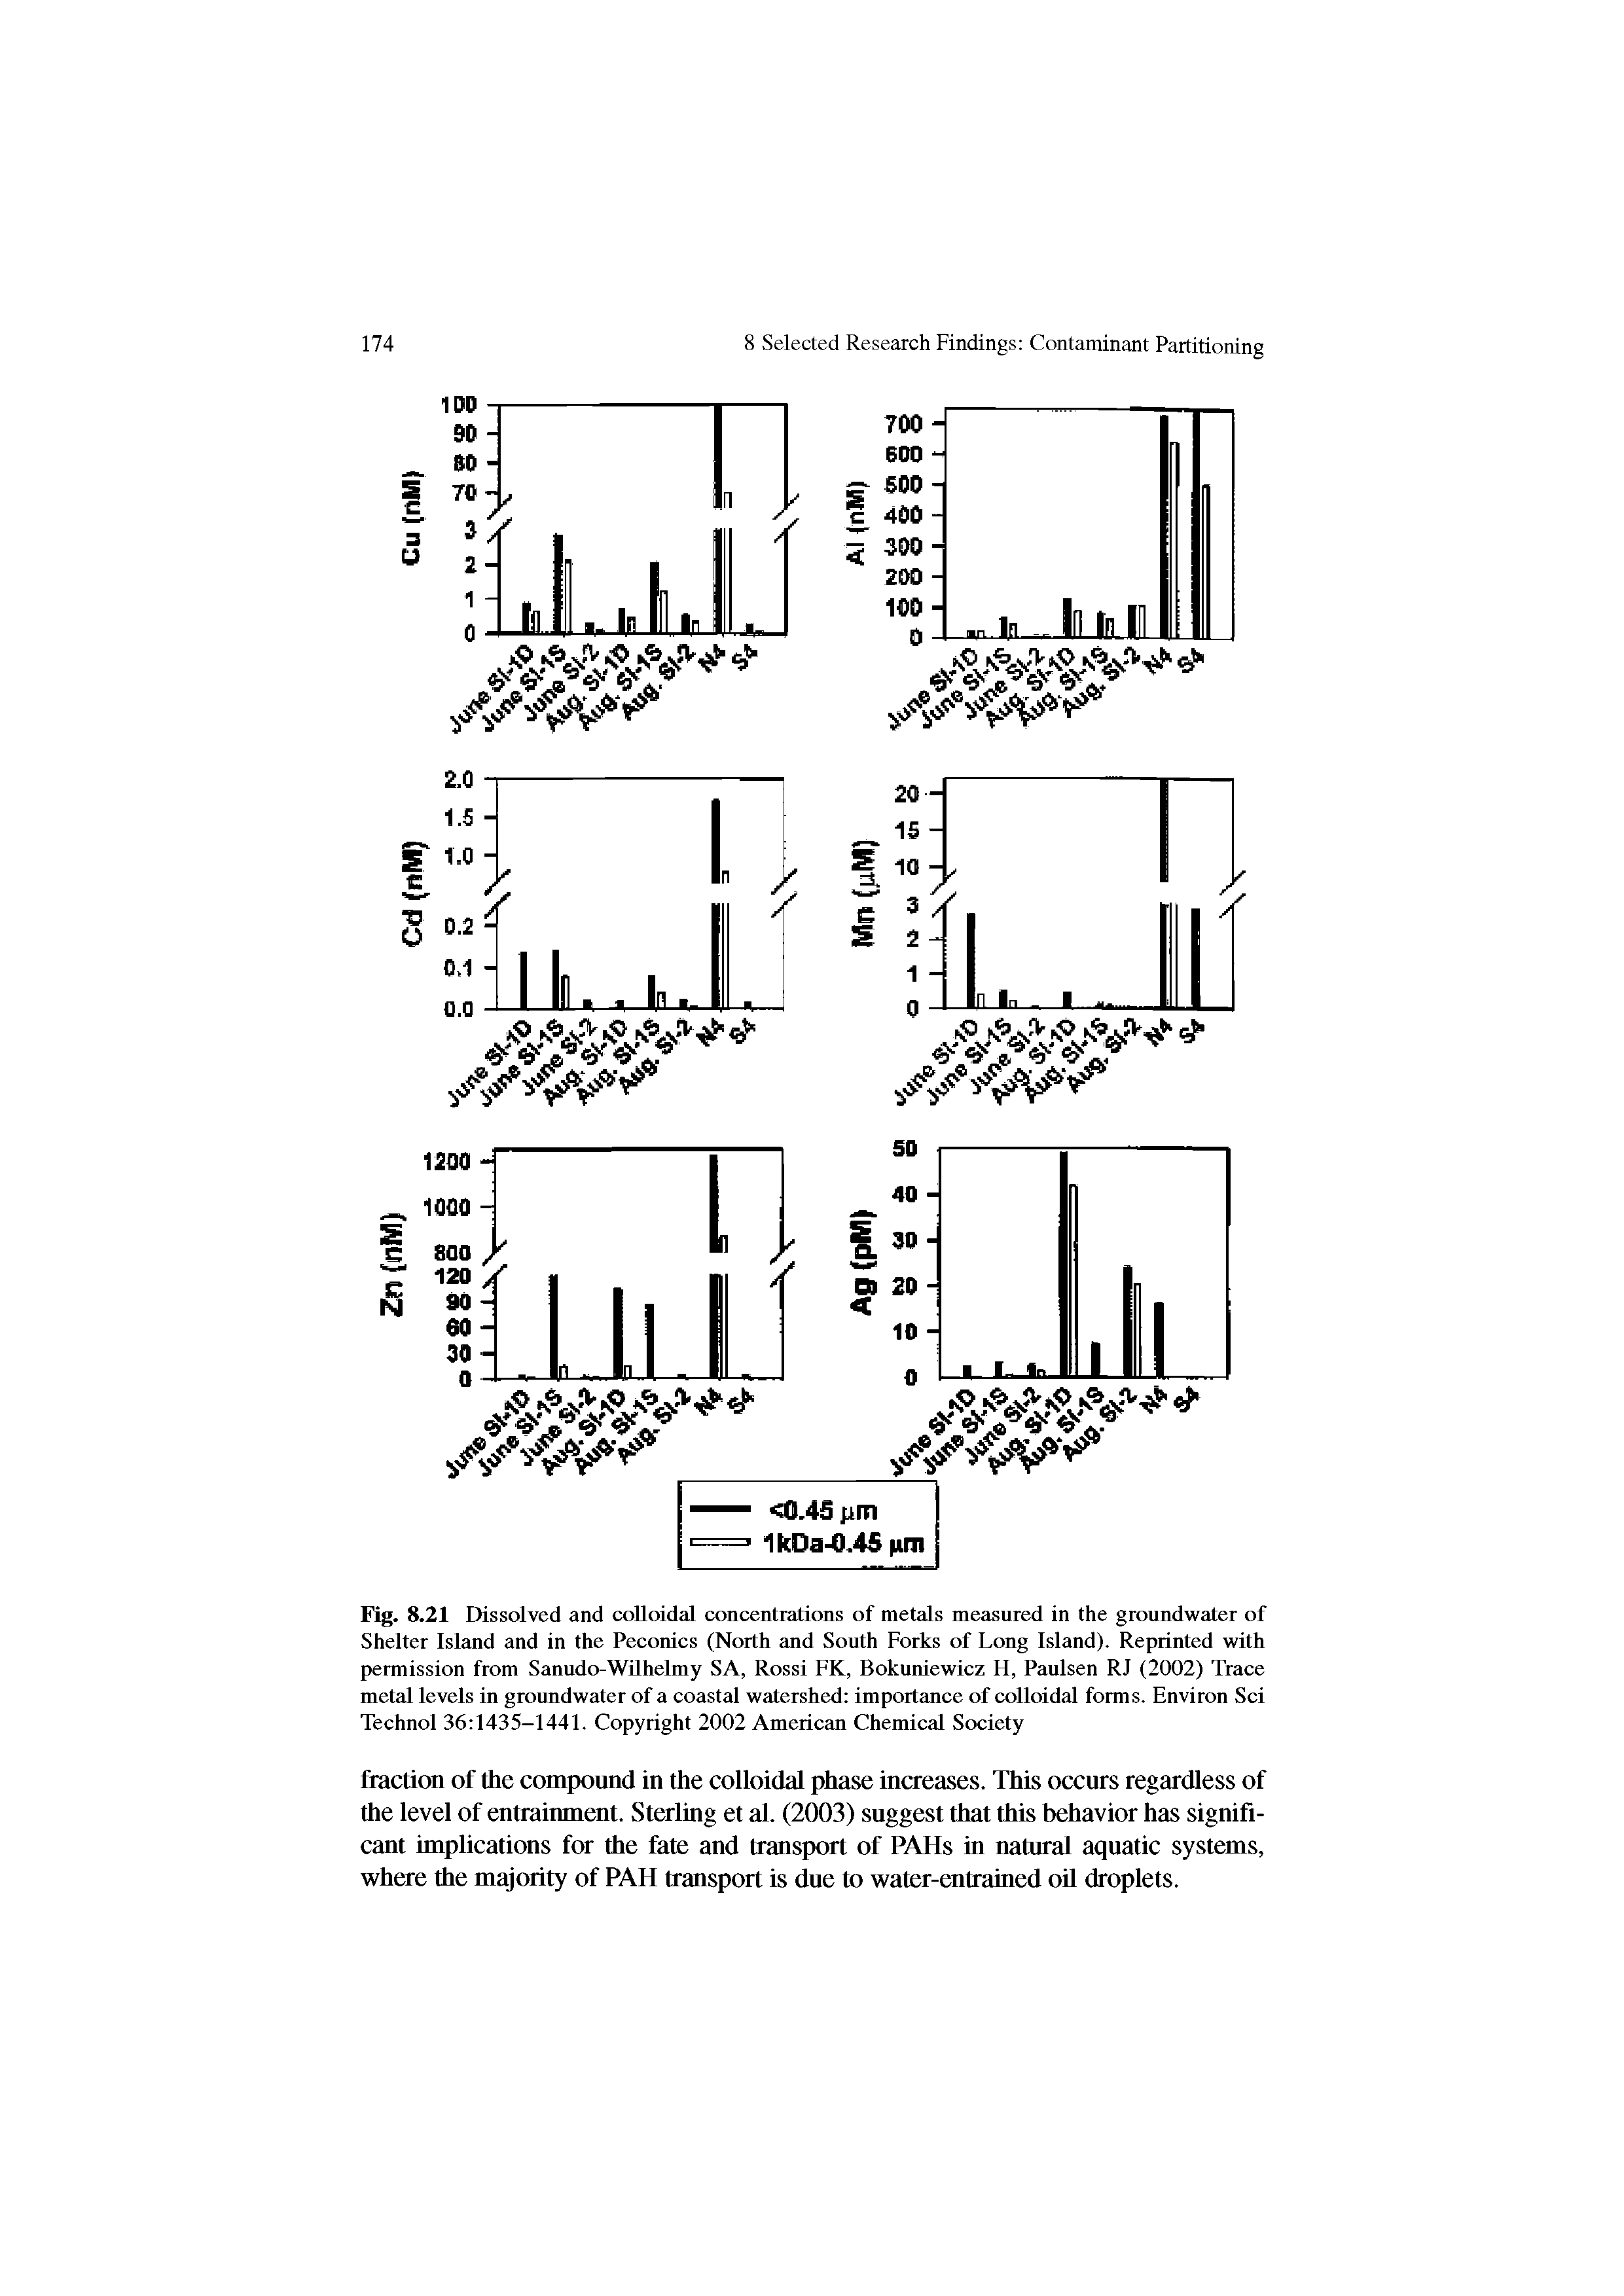 Fig. 8.21 Dissolved and coUoidal concentrations of metals measured in the groundwater of Shelter Island and in the Peconics (North and South Forks of Long Island). Reprinted with permission from Sanudo-Wilhelmy SA, Rossi FK, Bokuniewicz H, Paulsen RJ (2002) Trace metal levels in groundwater of a coastal watershed importance of colloidal forms. Environ Sci Technol 36 1435-1441. Copyright 2002 American Chemical Society...